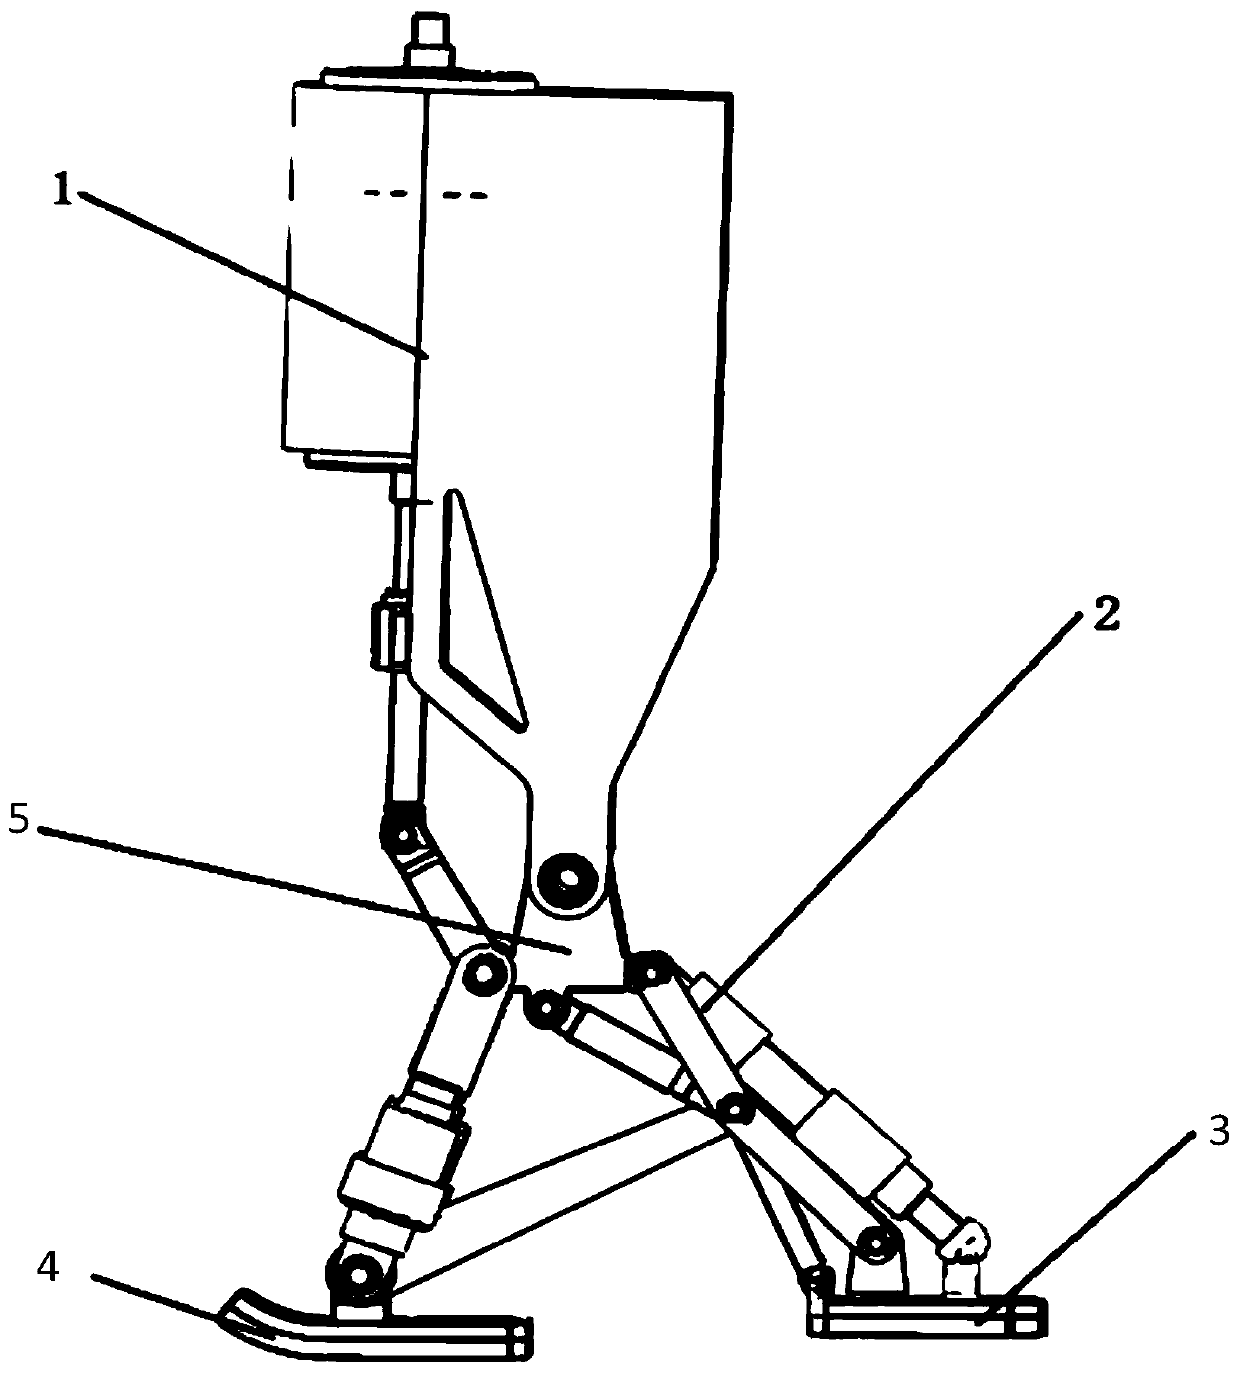 Single-driving-force multi-freedom-degree foot device realizing self-adaption to landform